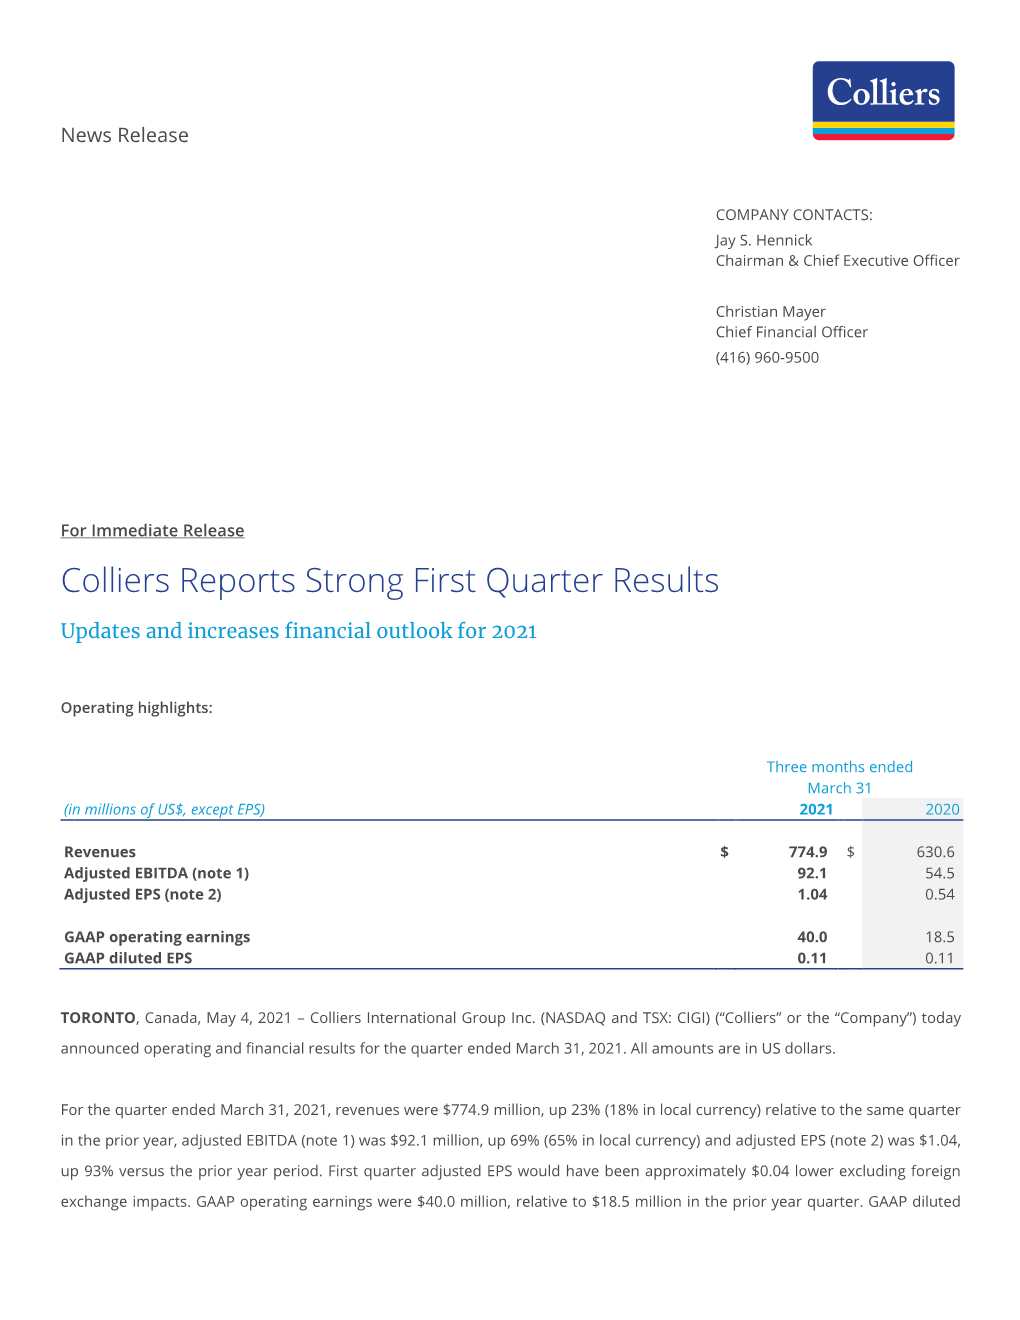 Colliers Reports Strong First Quarter Results